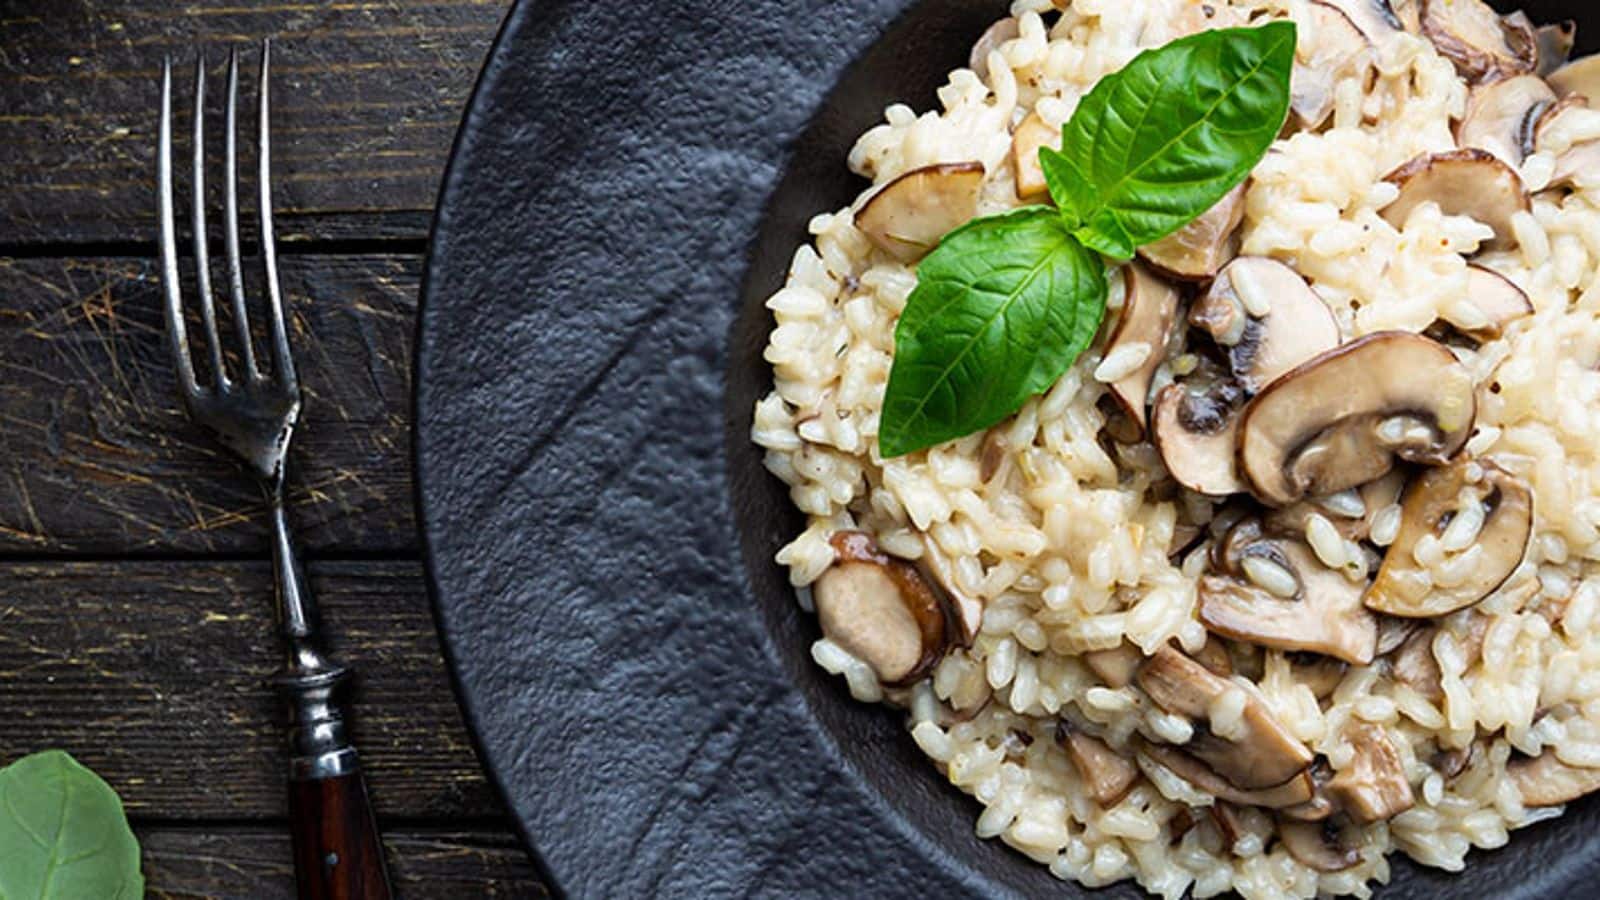 Try this luxurious truffle mushroom risotto recipe